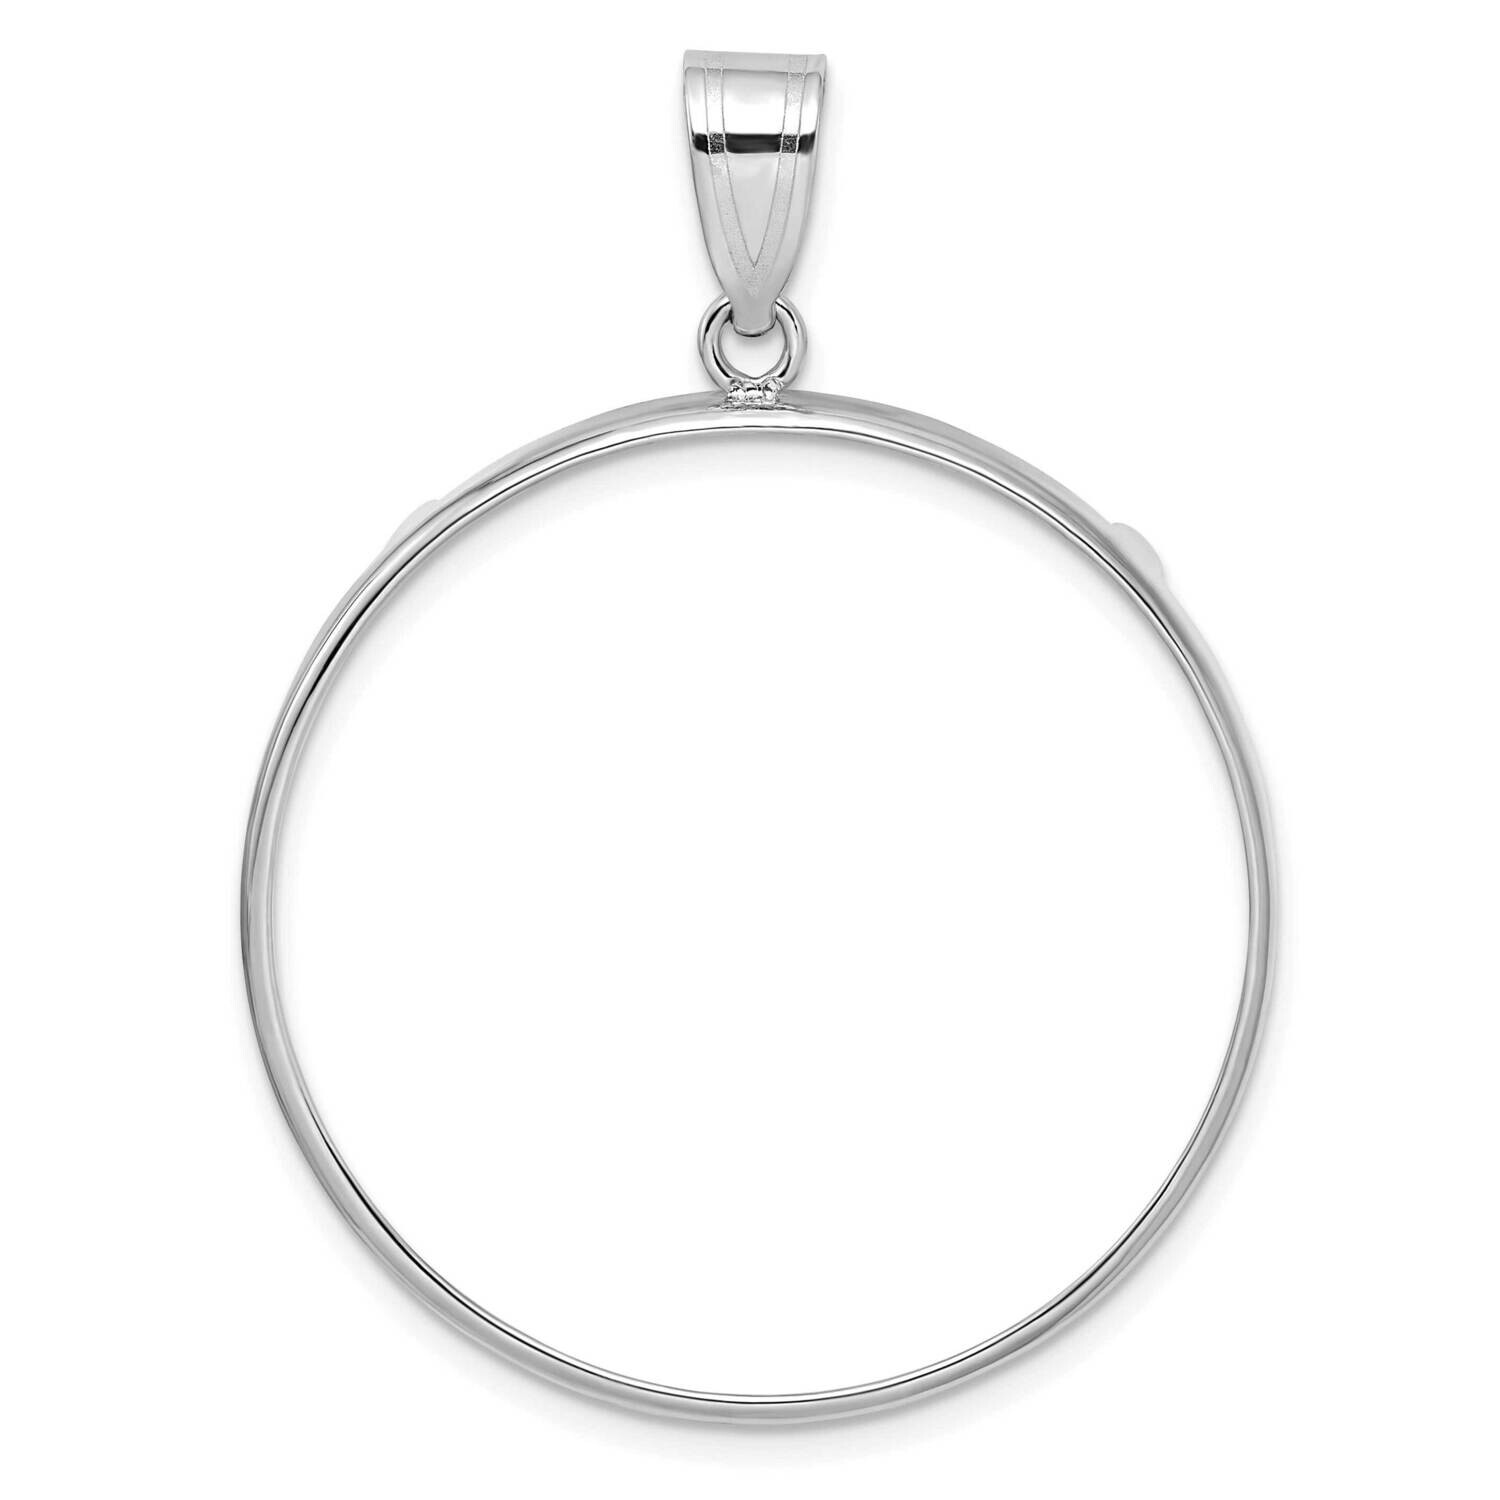 WidebDistinguished Coin Jewelry Polished Prong 32.7mm Coin Bezel Pendant 14k White Gold C1801W/32.7